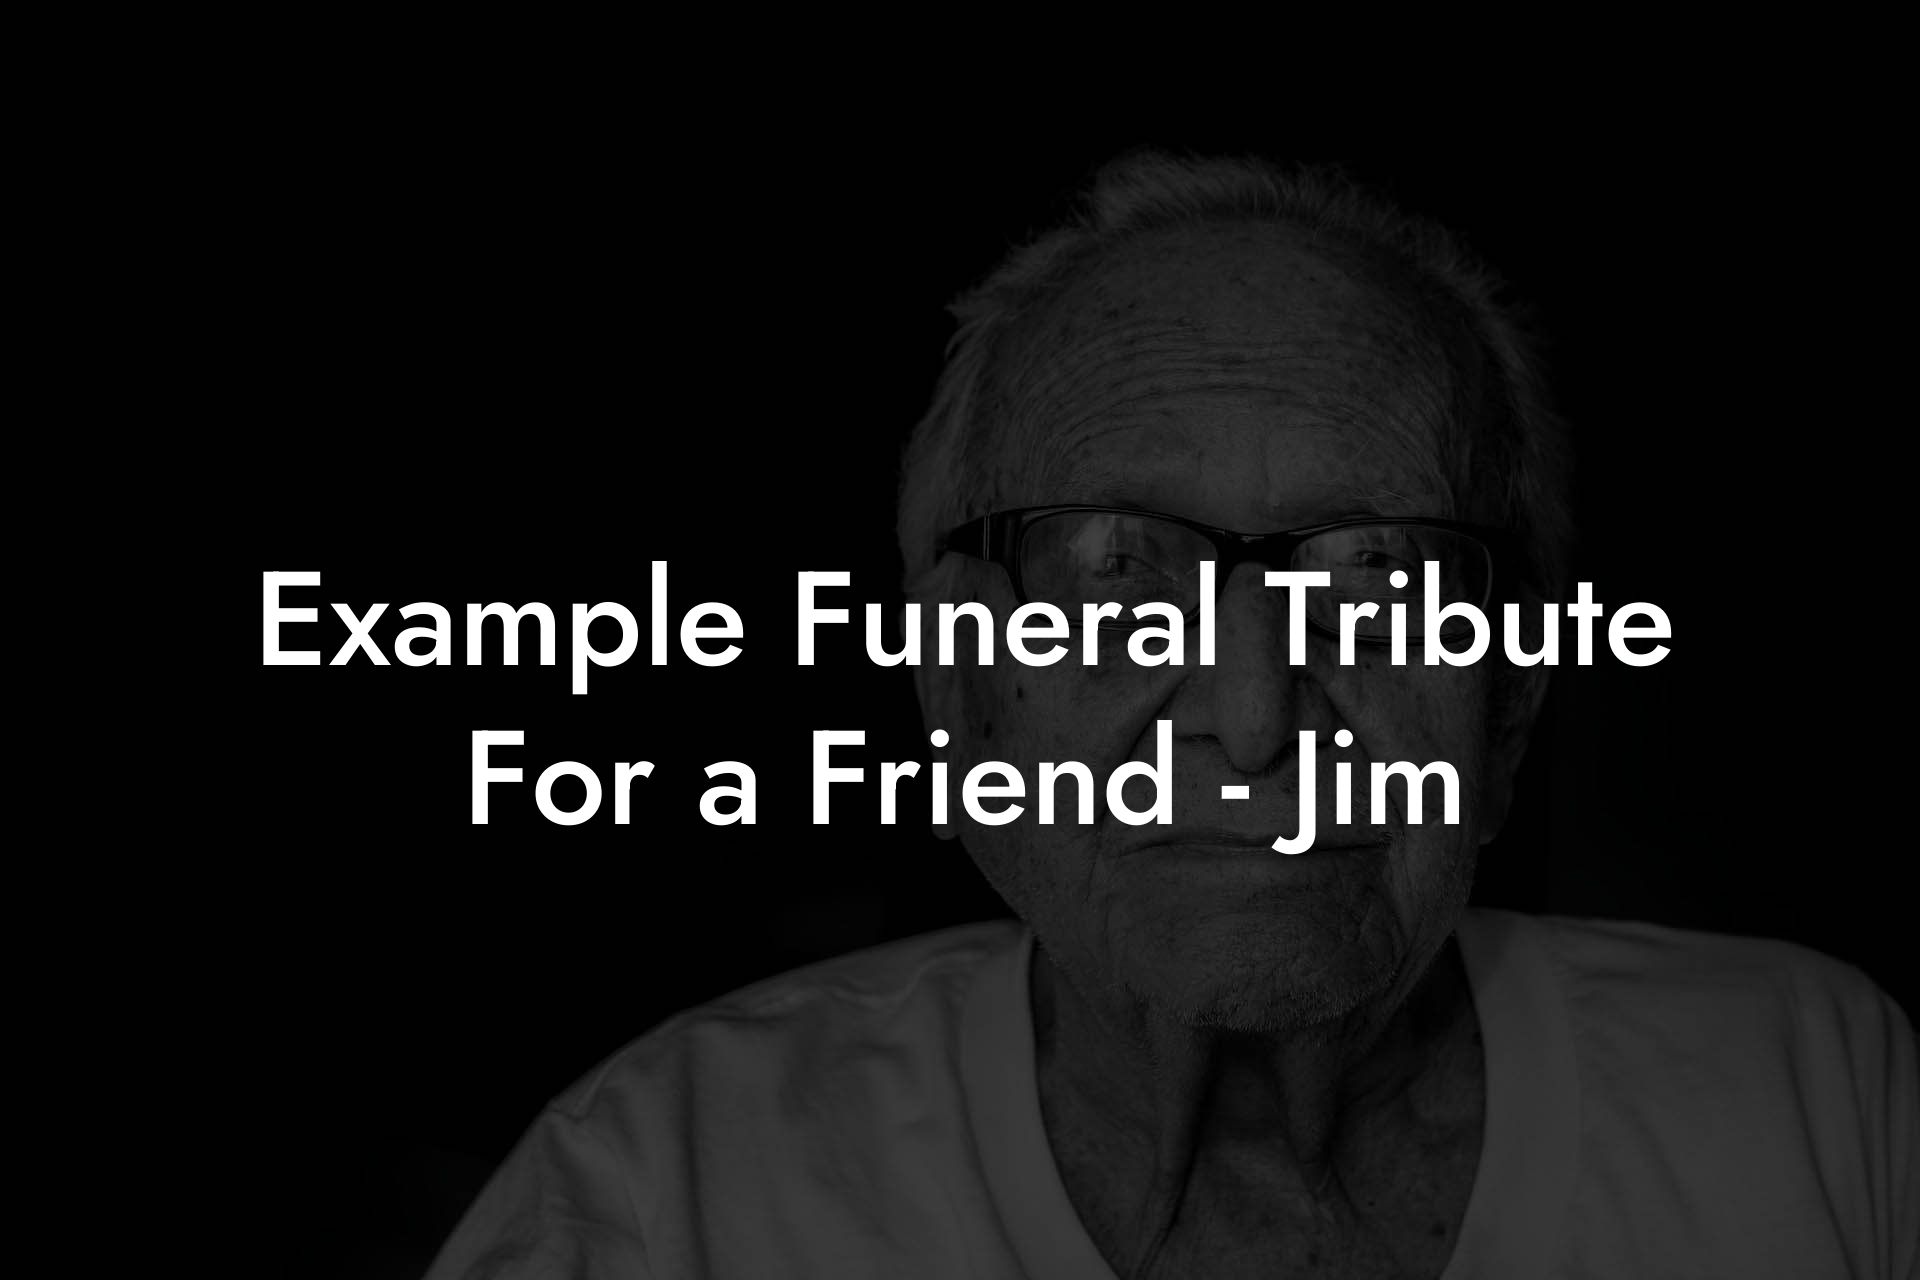 Example Funeral Tribute For a Friend - Jim